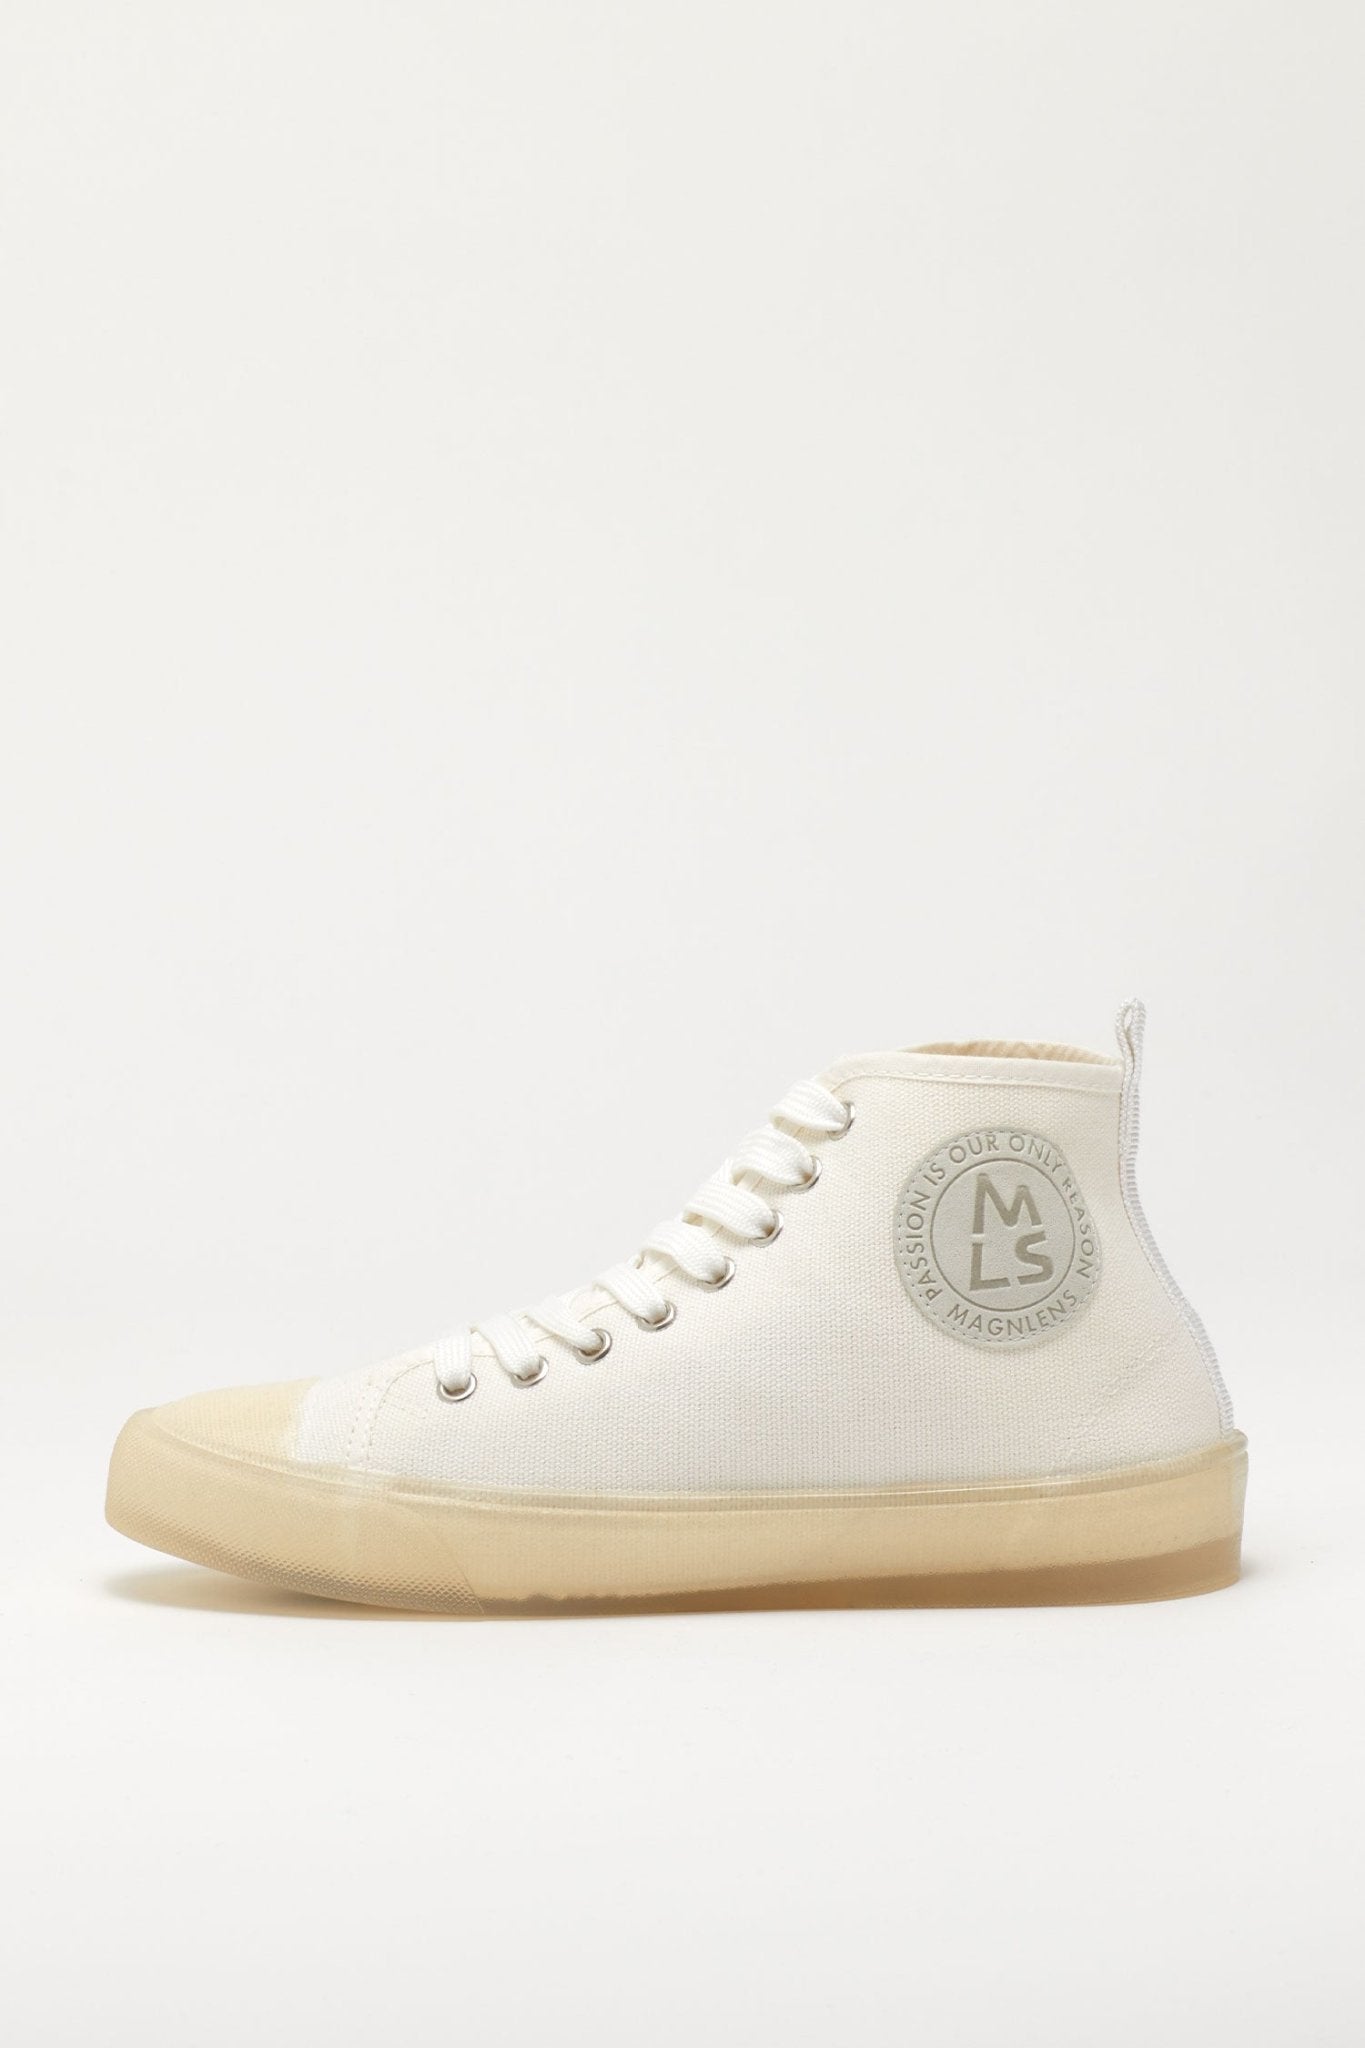 Classic High Top Sneakers With Toe Cap - Magnlens